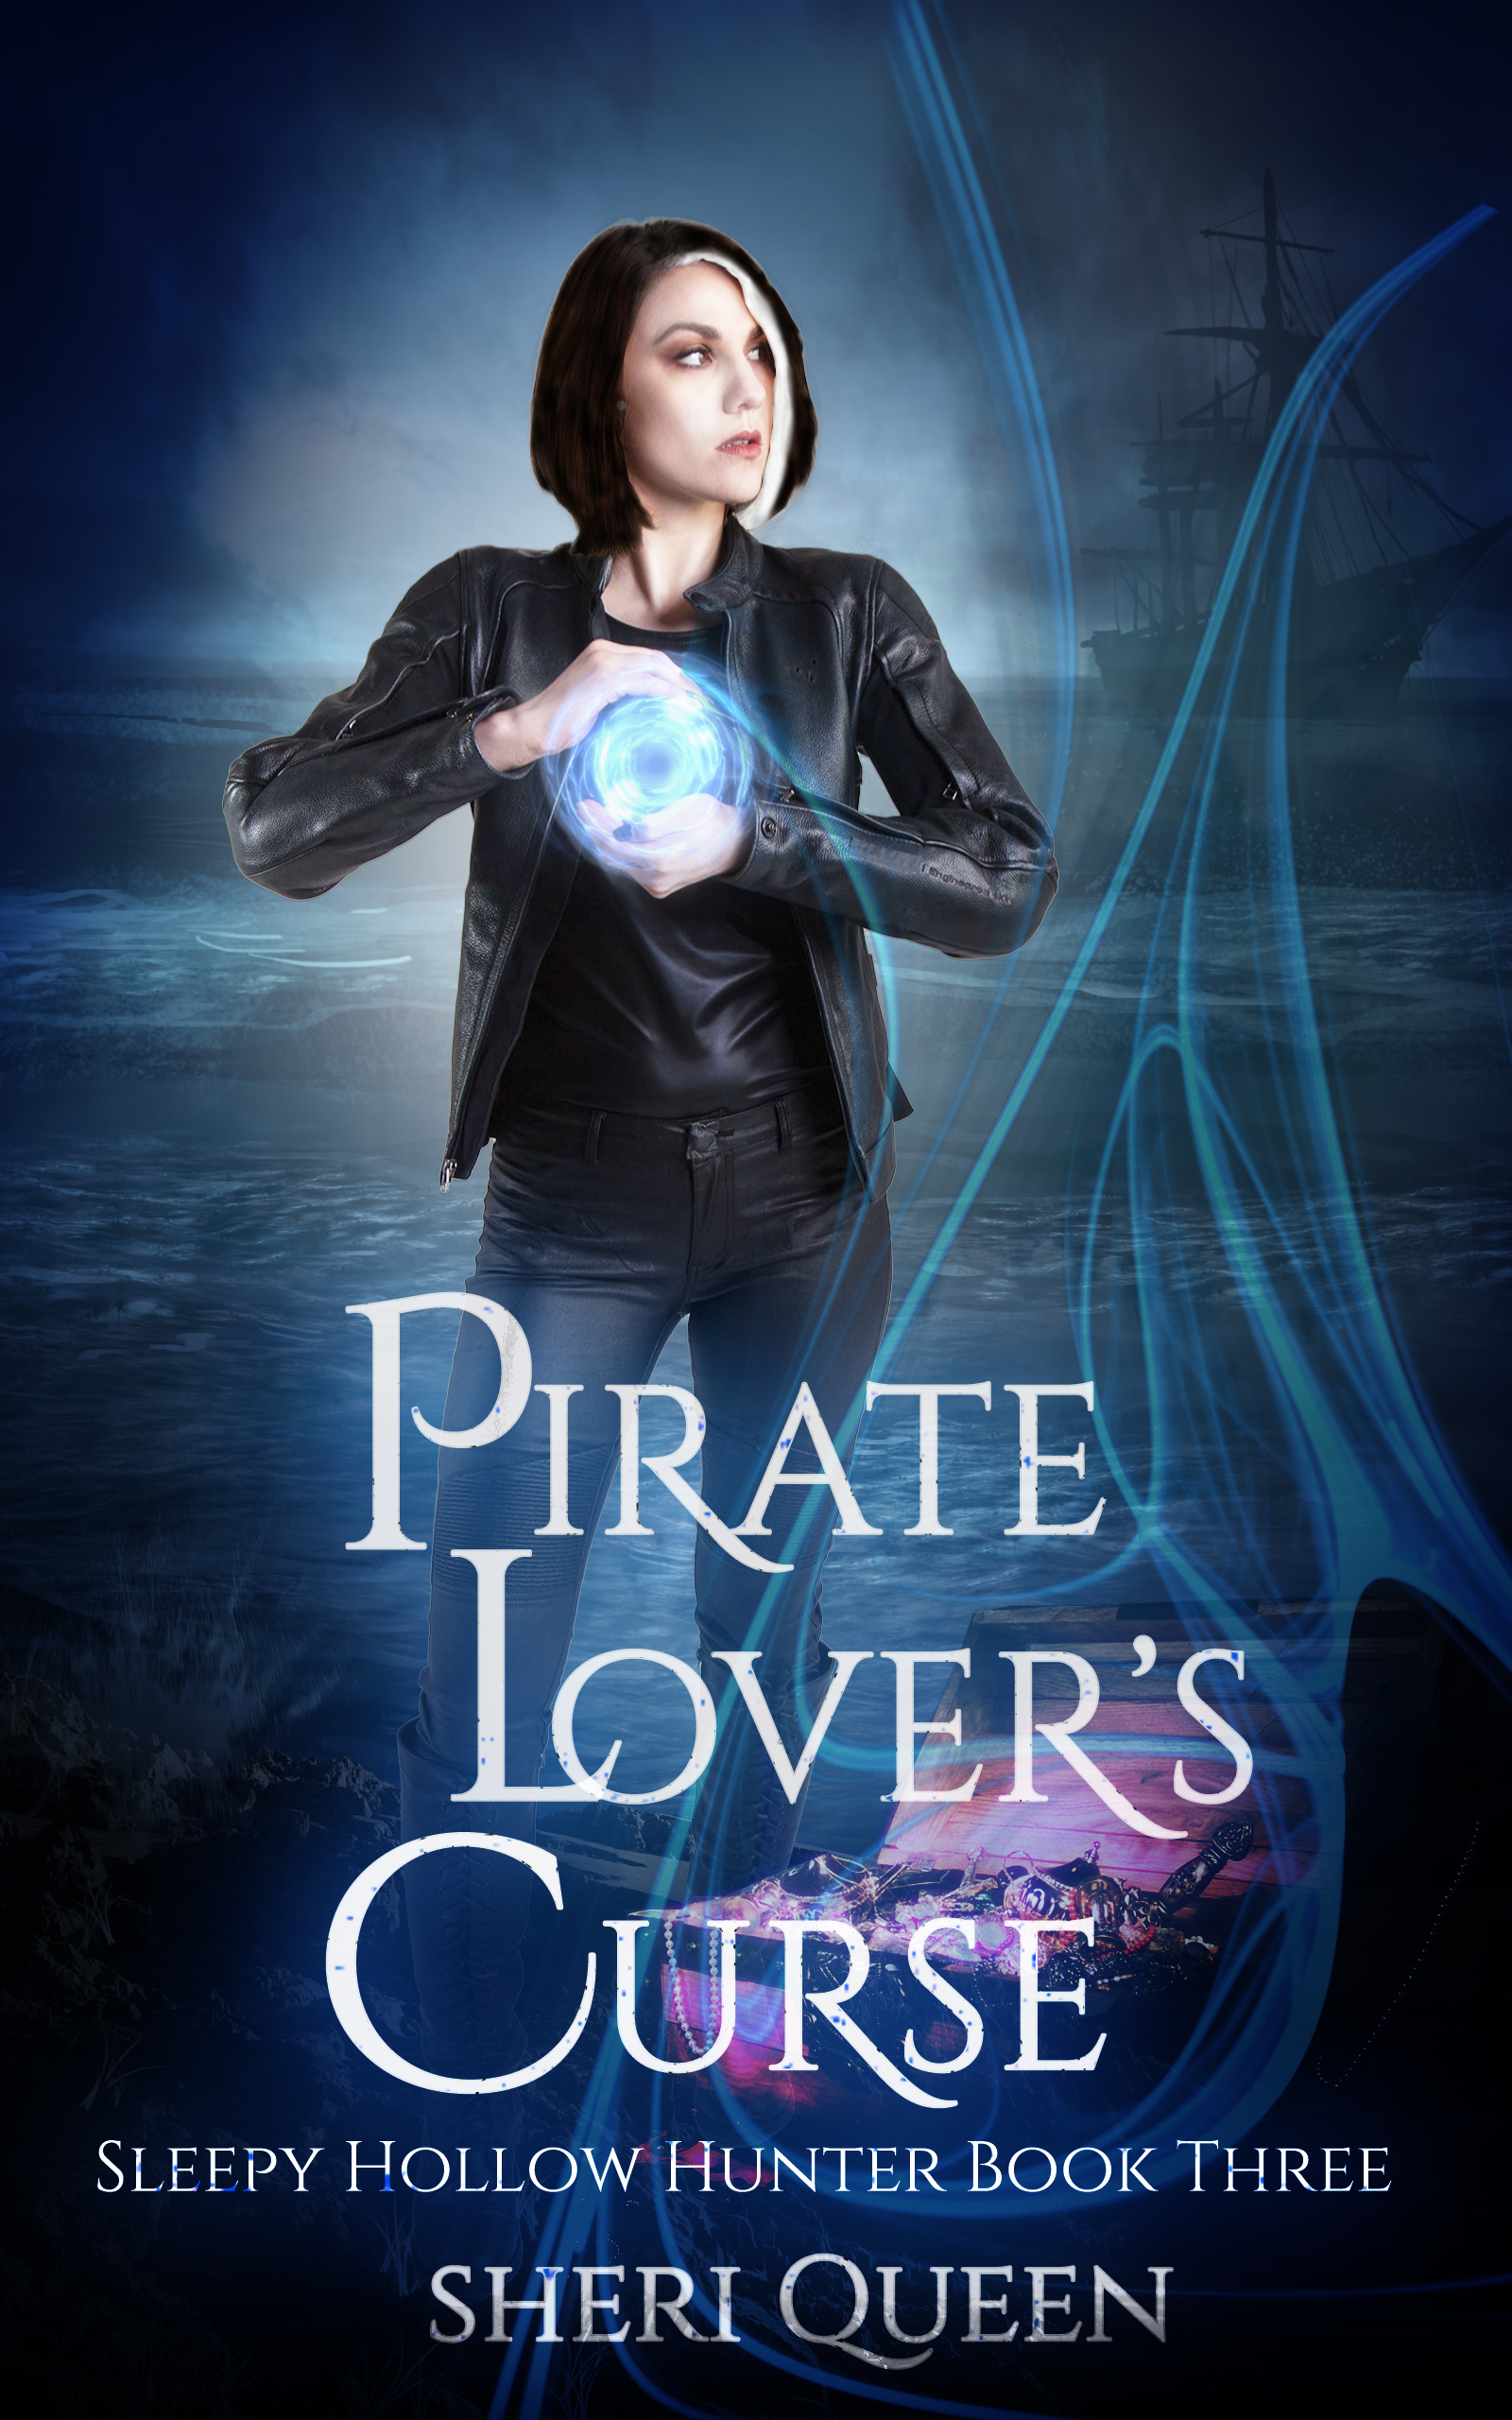 Pirate Lover's Curse by Sheri Queen - Book Tour + Giveaway